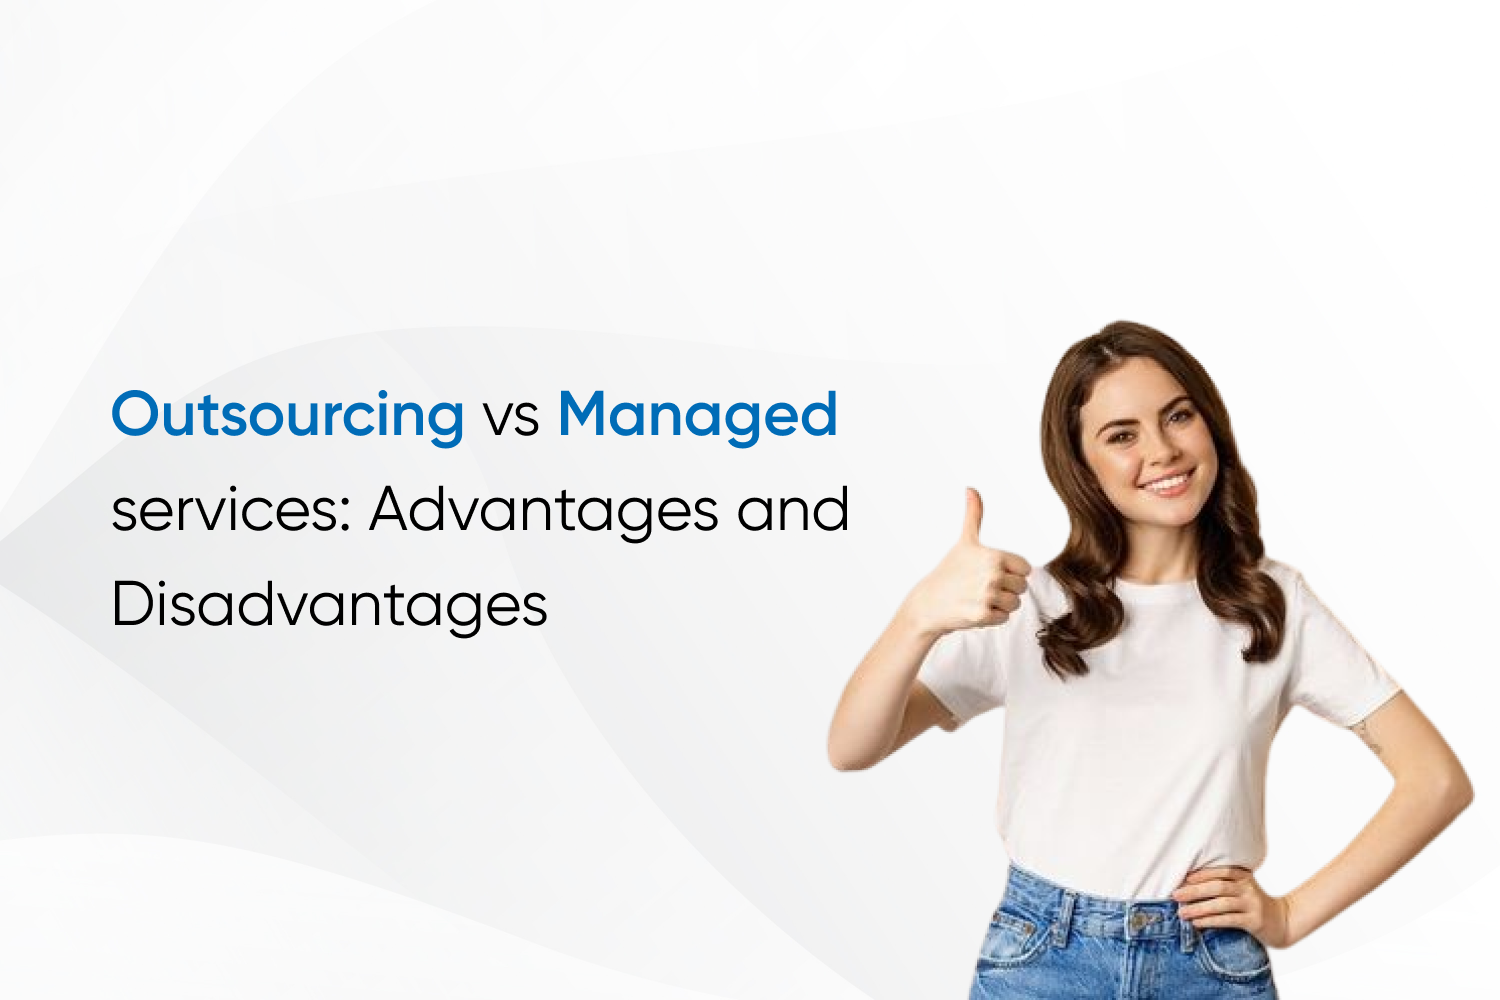 Outsourcing vs Managed services: Advantages and Disadvantages